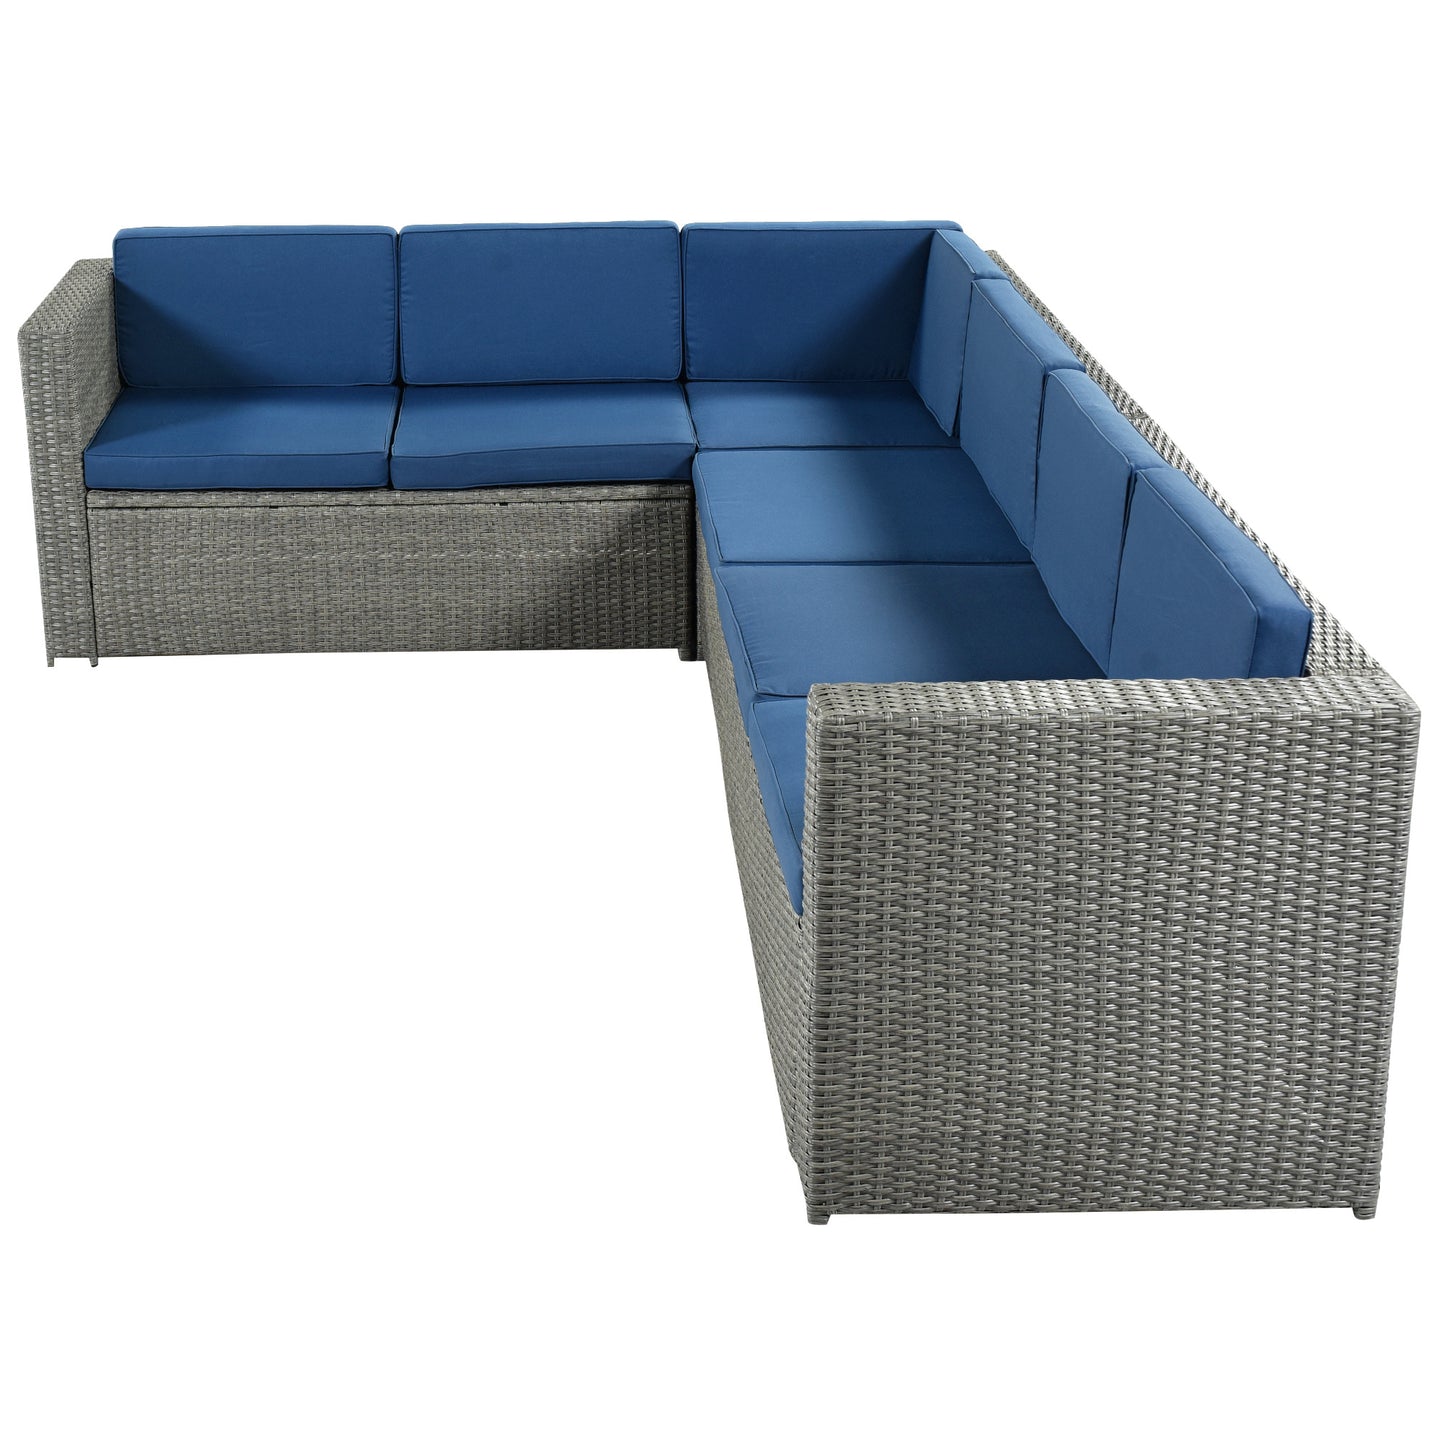 9 Piece Rattan Outdoor Patio Sectional Seating Group with Cushions and Ottoman